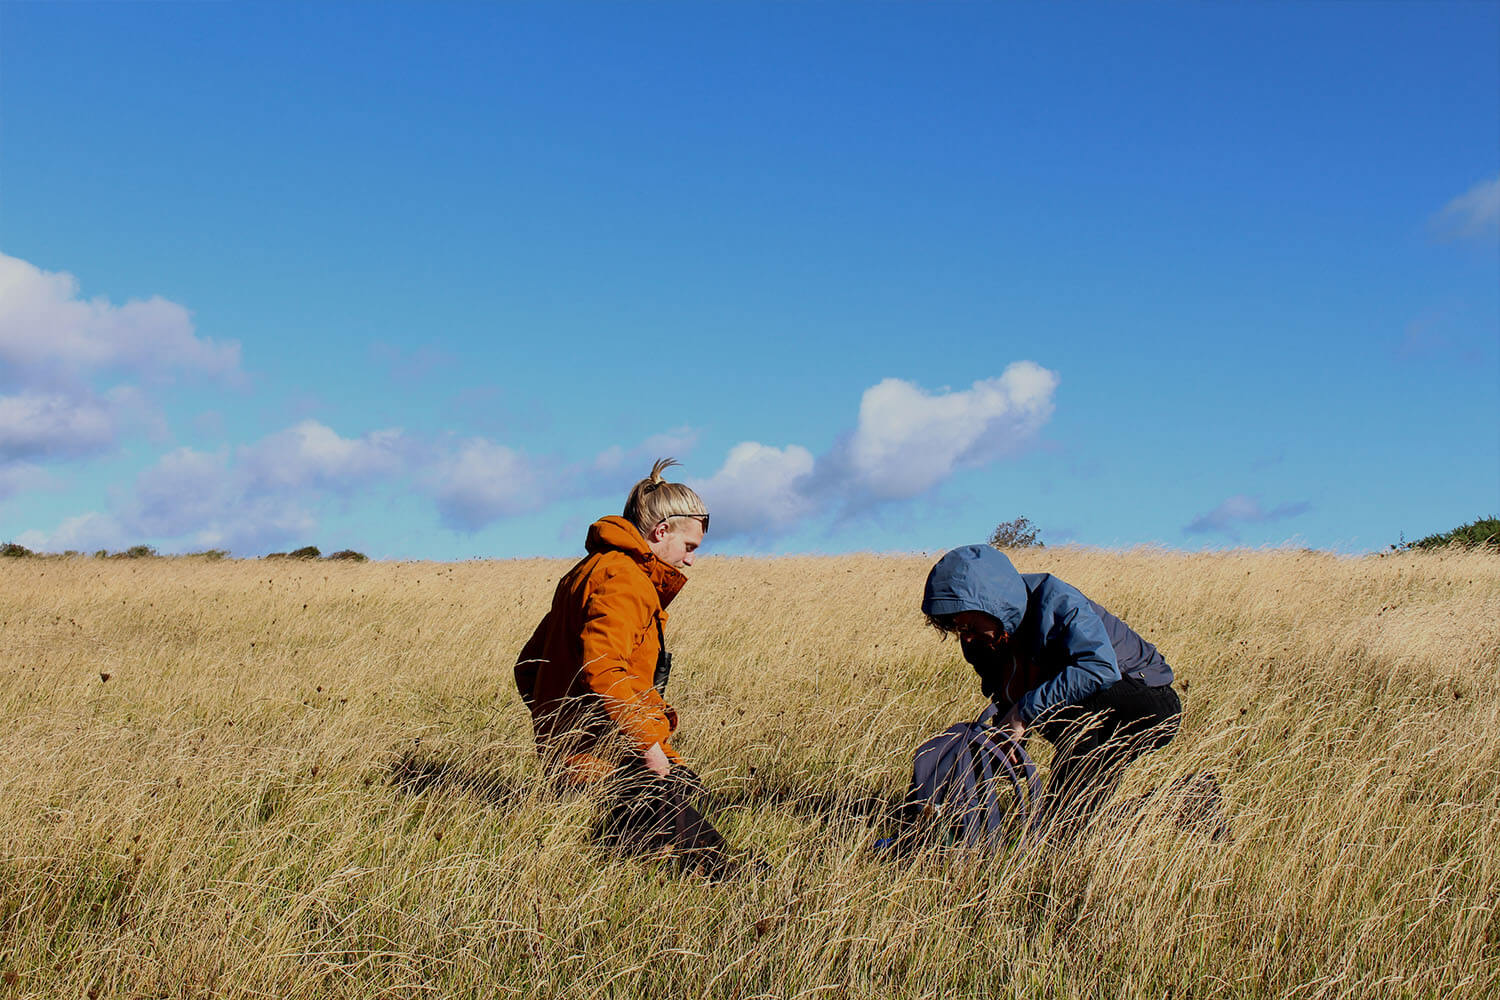 Two students kneeling in a hay field under a blue sky carrying out survey work